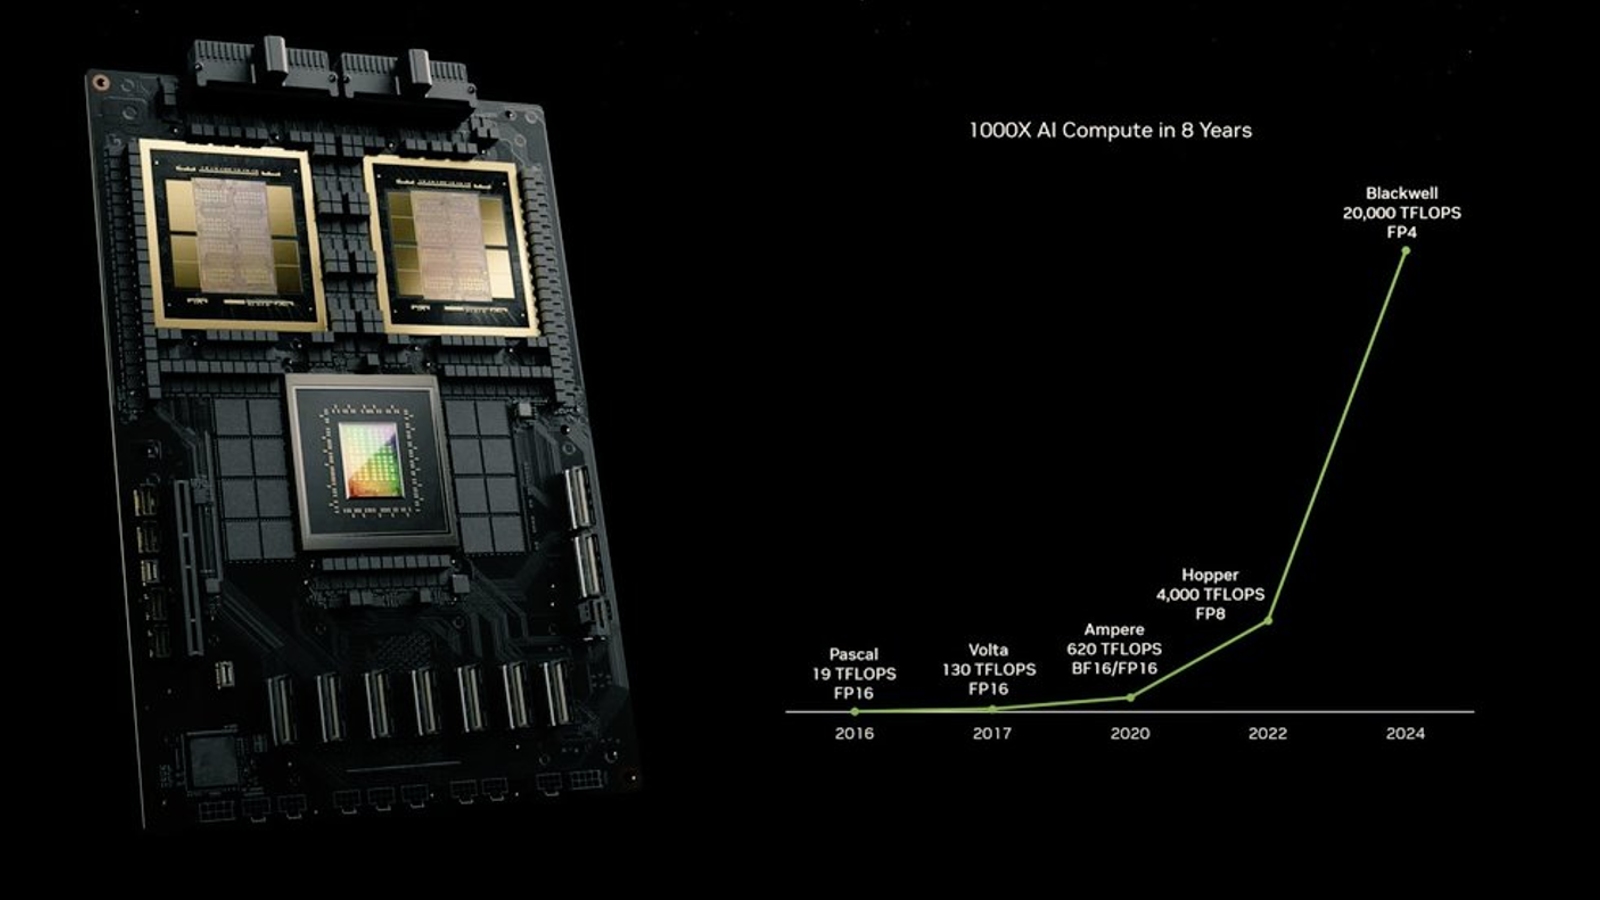 NVIDIA Introduces Blackwell Chip for Advancing Technology (AI)